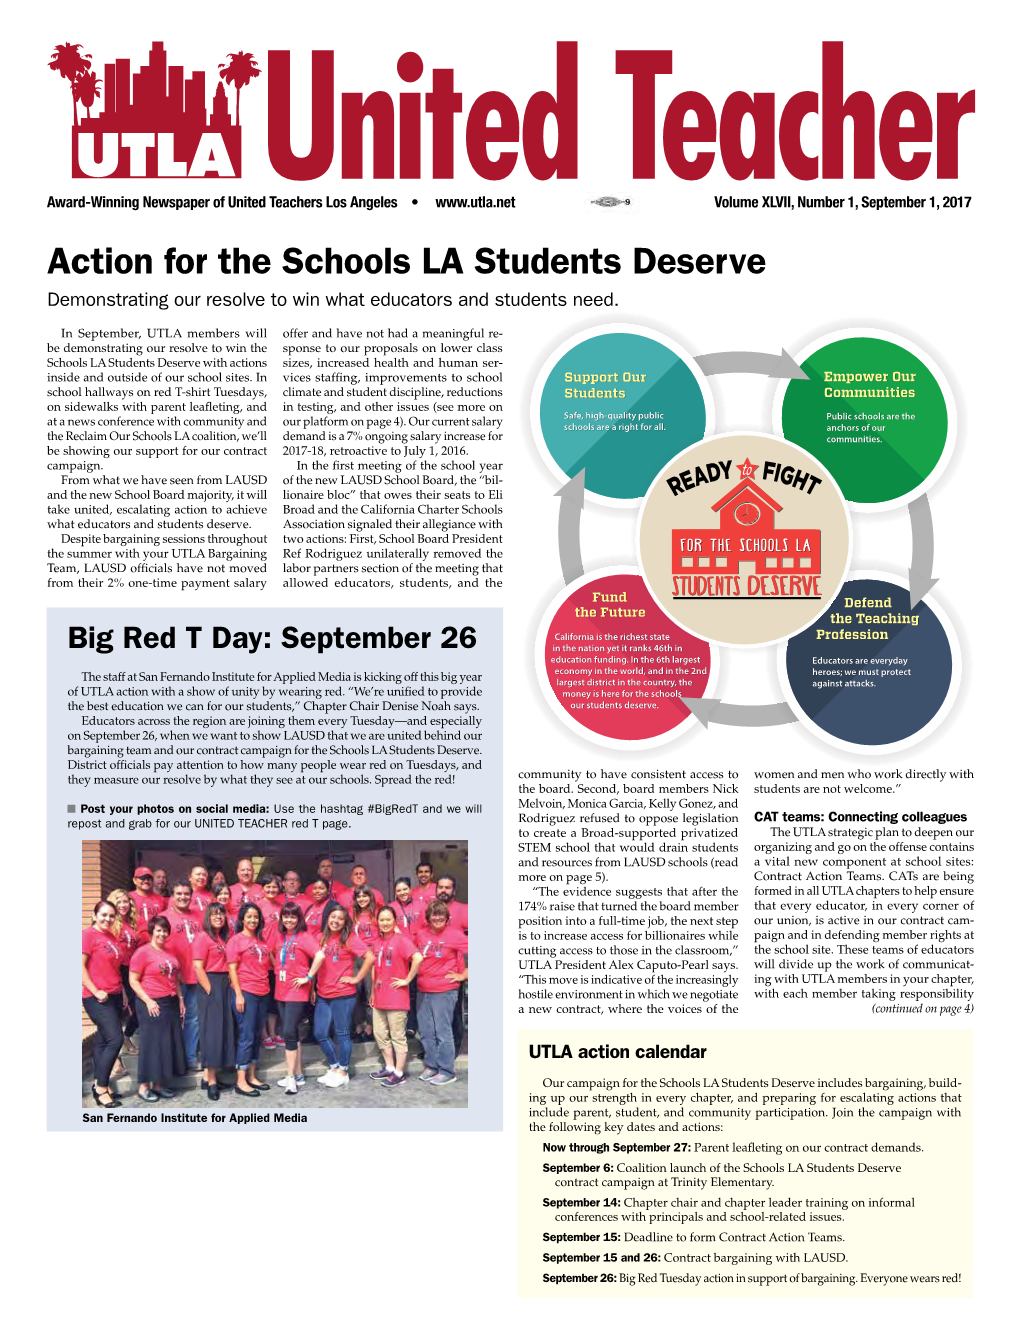 Action for the Schools LA Students Deserve Demonstrating Our Resolve to Win What Educators and Students Need